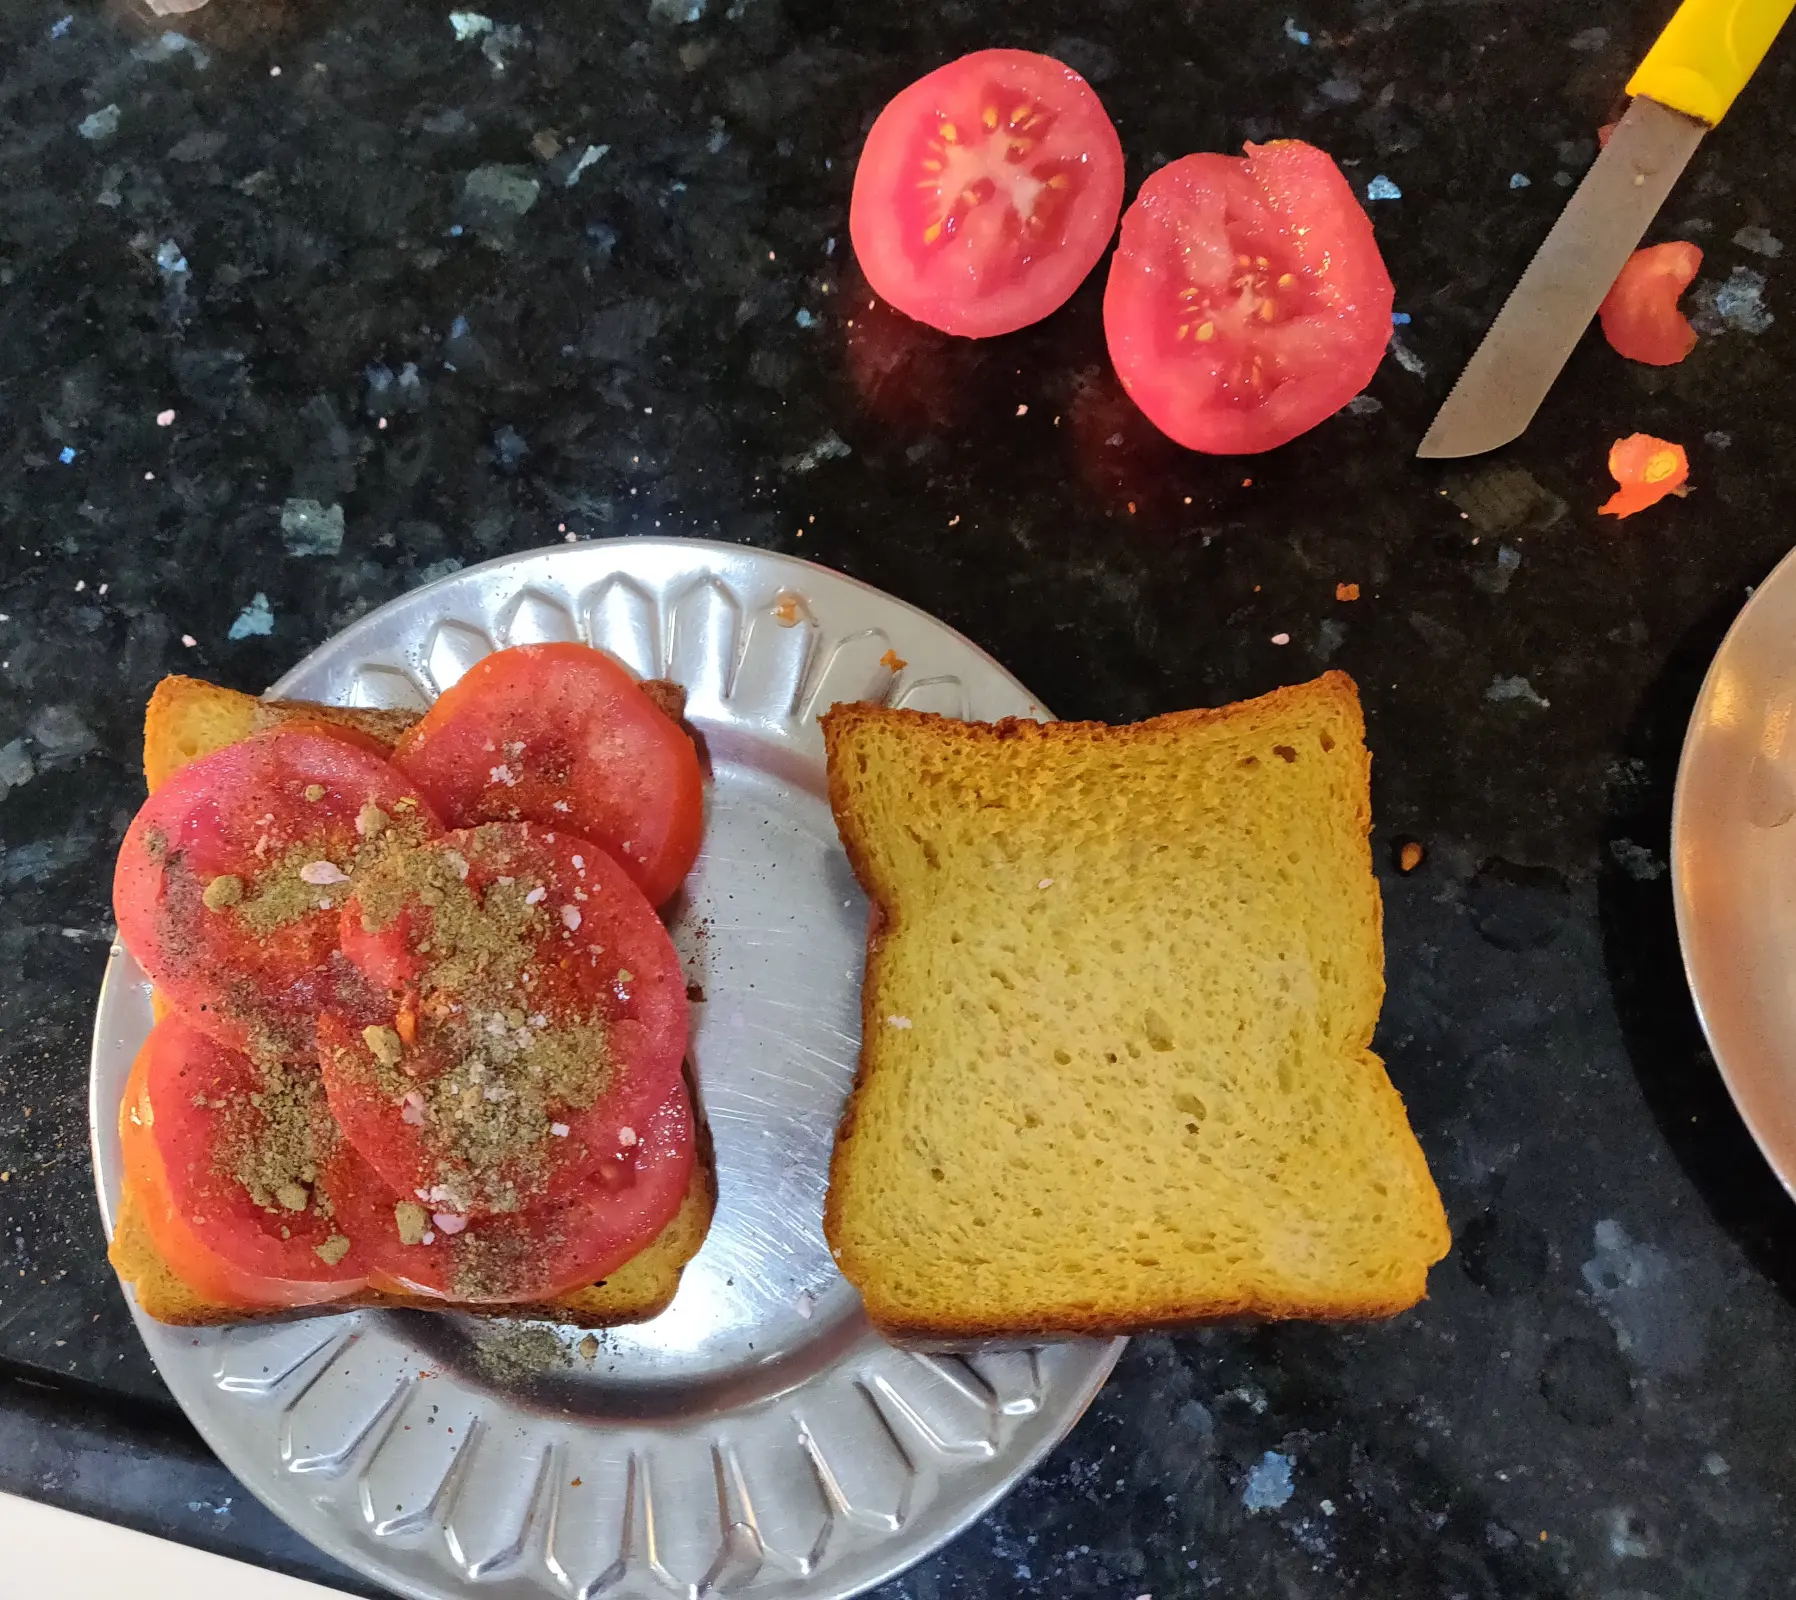 Spices sprinkled on tomato slices placed on a slice of bread.